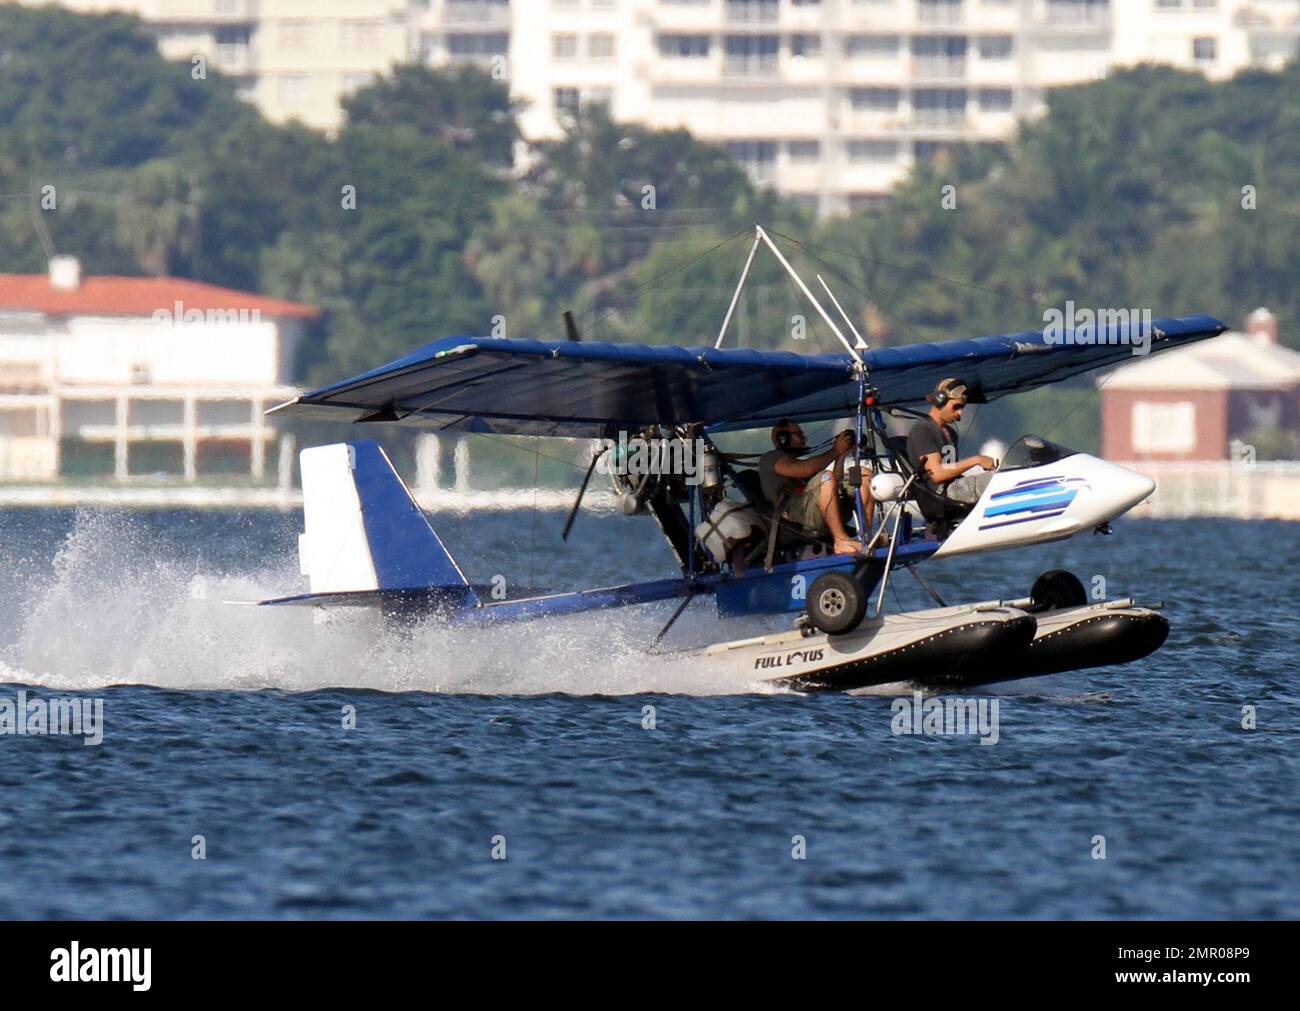 EXCLUSIVE!! Pop music superstar Enrique Iglesias takes to the waves and the  skies with a